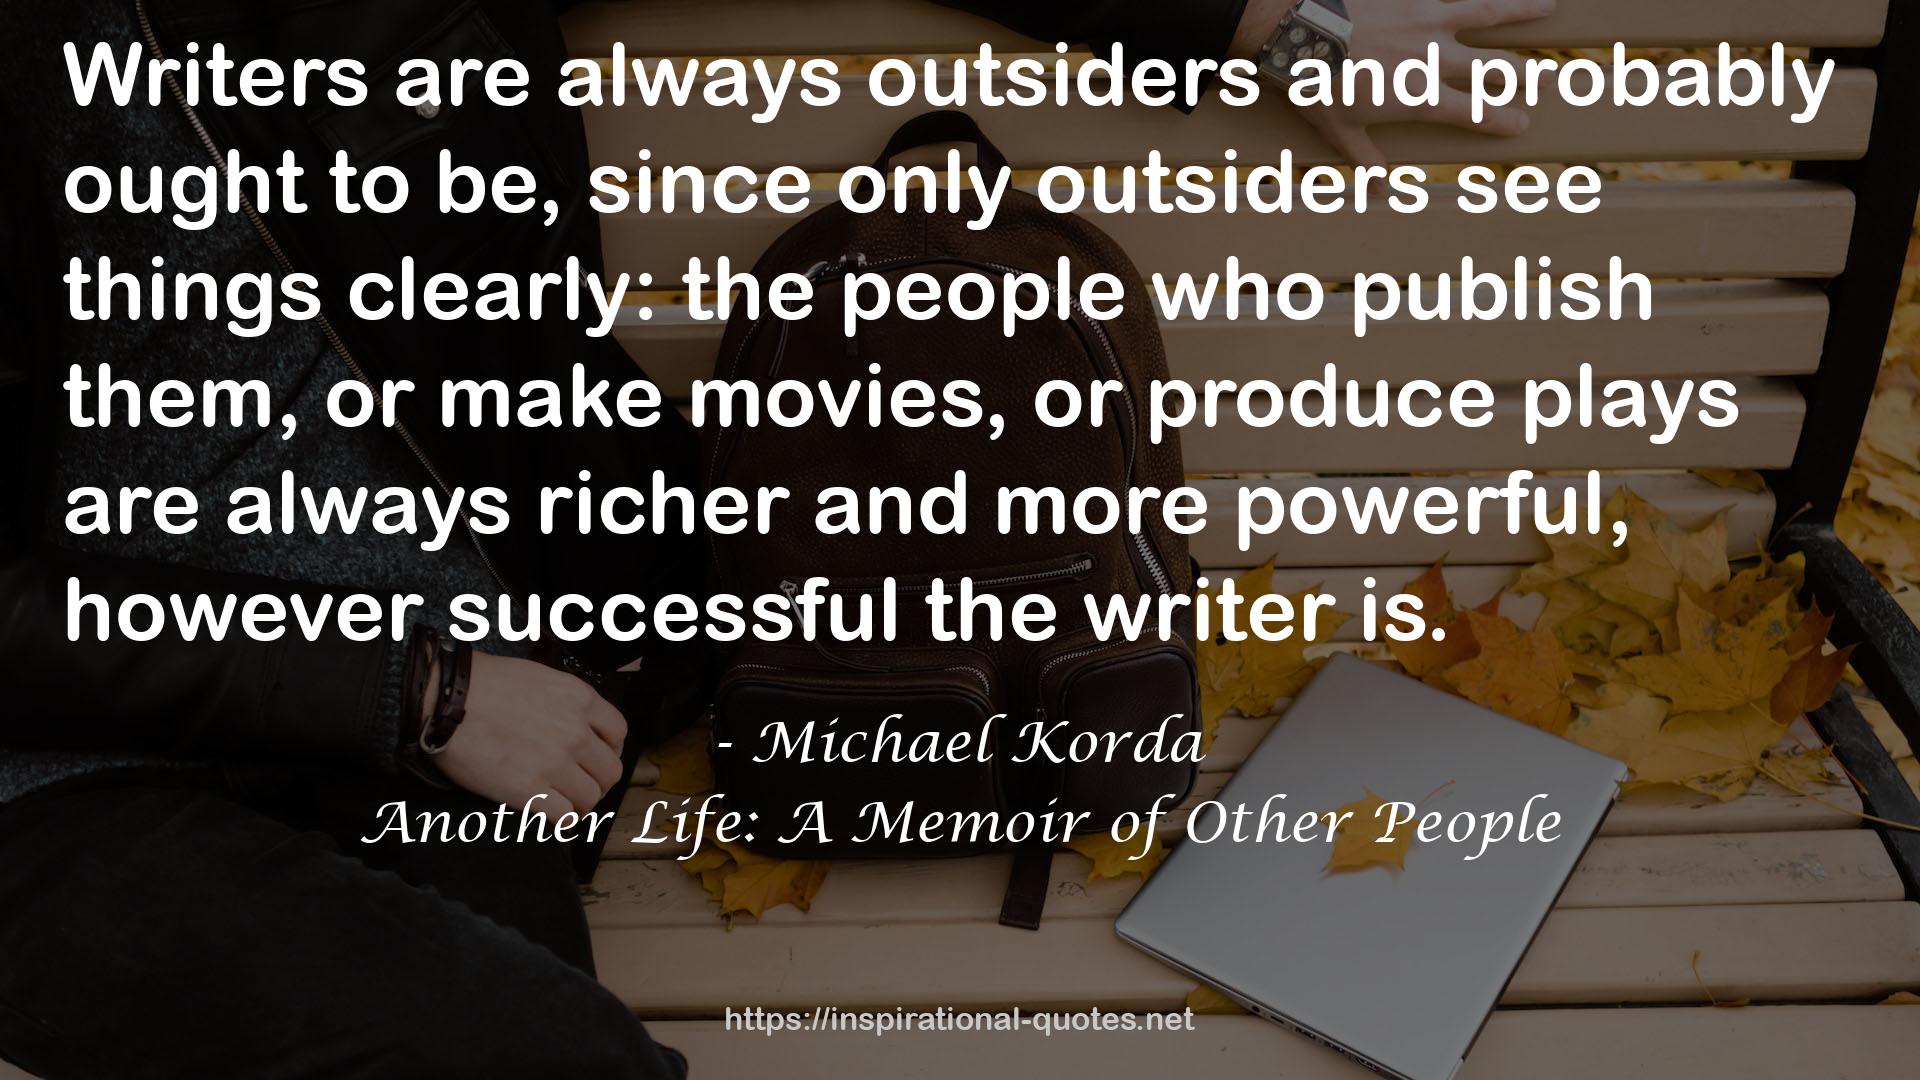 Another Life: A Memoir of Other People QUOTES